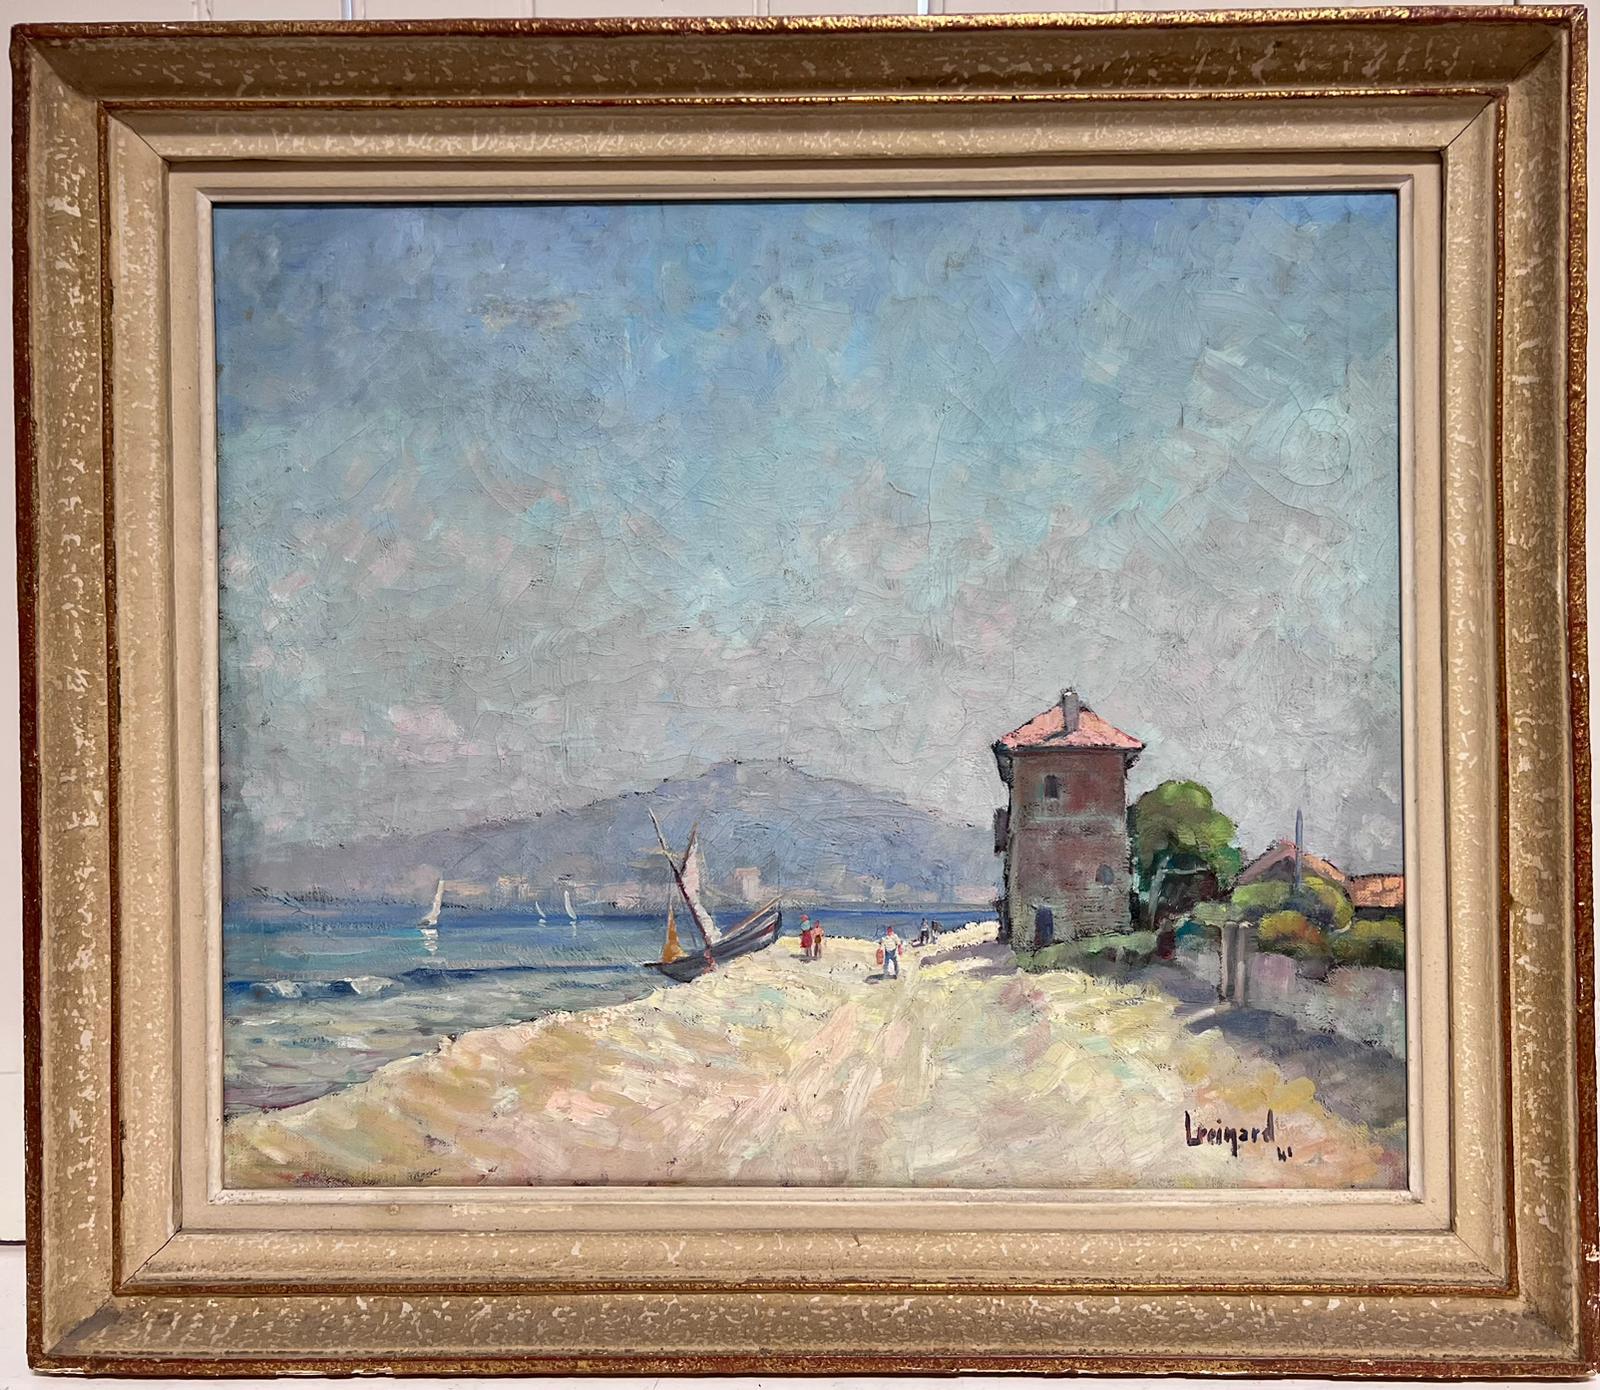 The Beach at Martigues, South of France
French artist, signed and dated 1941
signed oil painting on canvas, framed
framed: 22.5 x 26 inches
canvas: 19 x 22 inches
provenance: private collection, Provence, France
condition: very good and sound